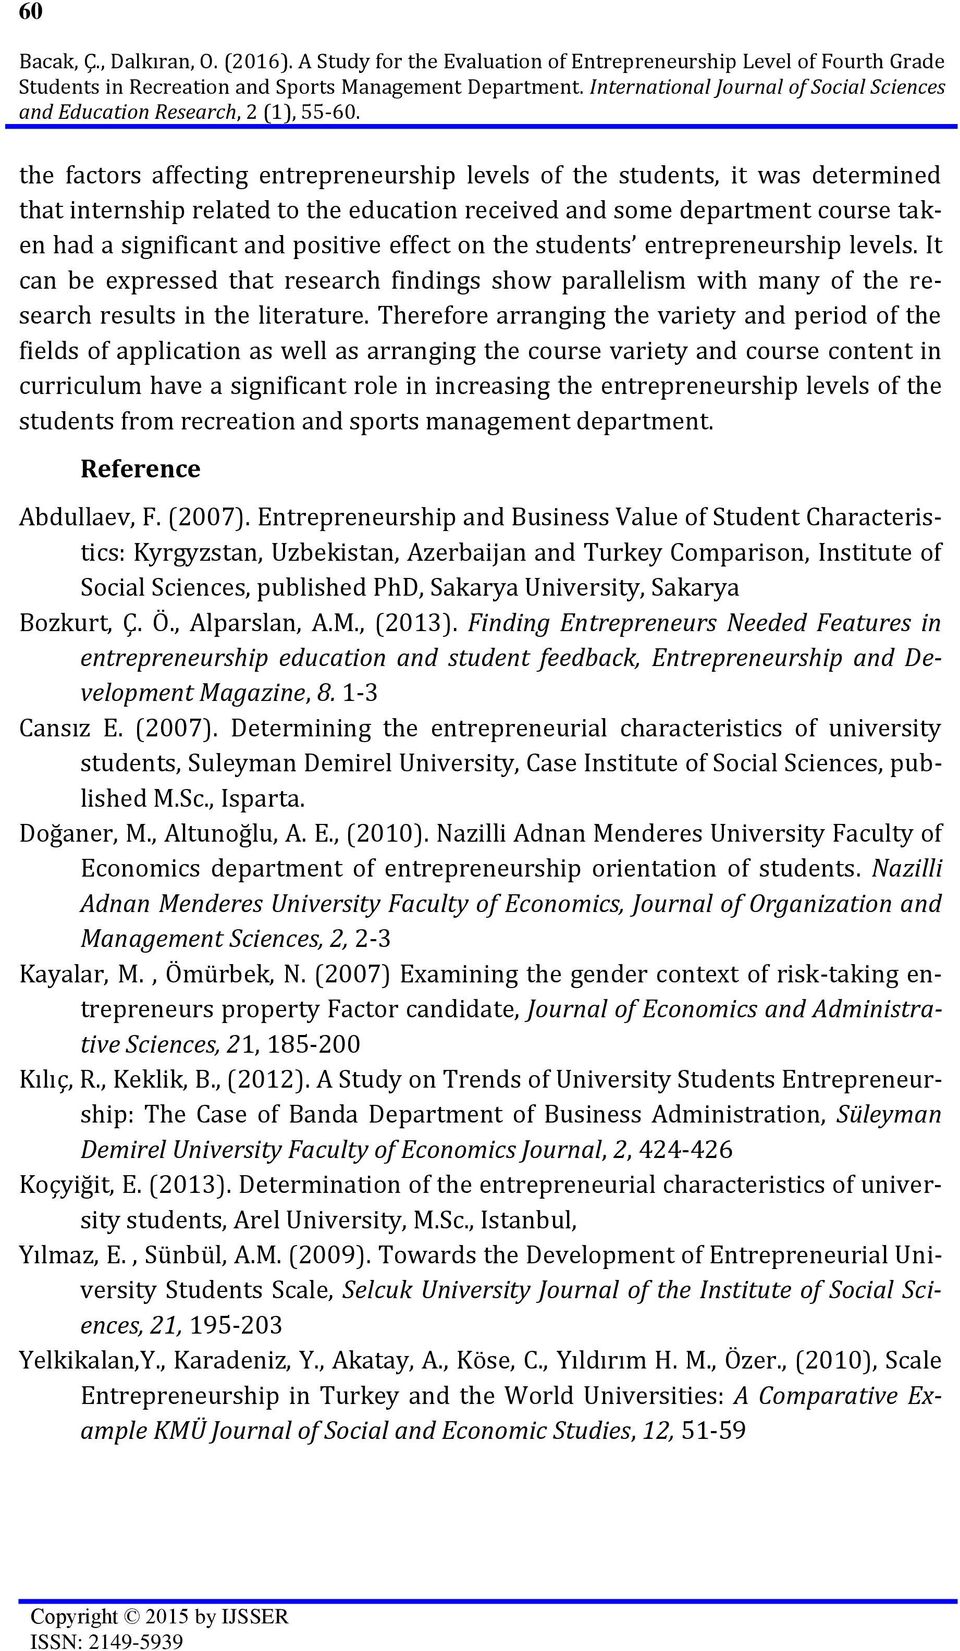 and some department course taken had a significant and positive effect on the students entrepreneurship levels.